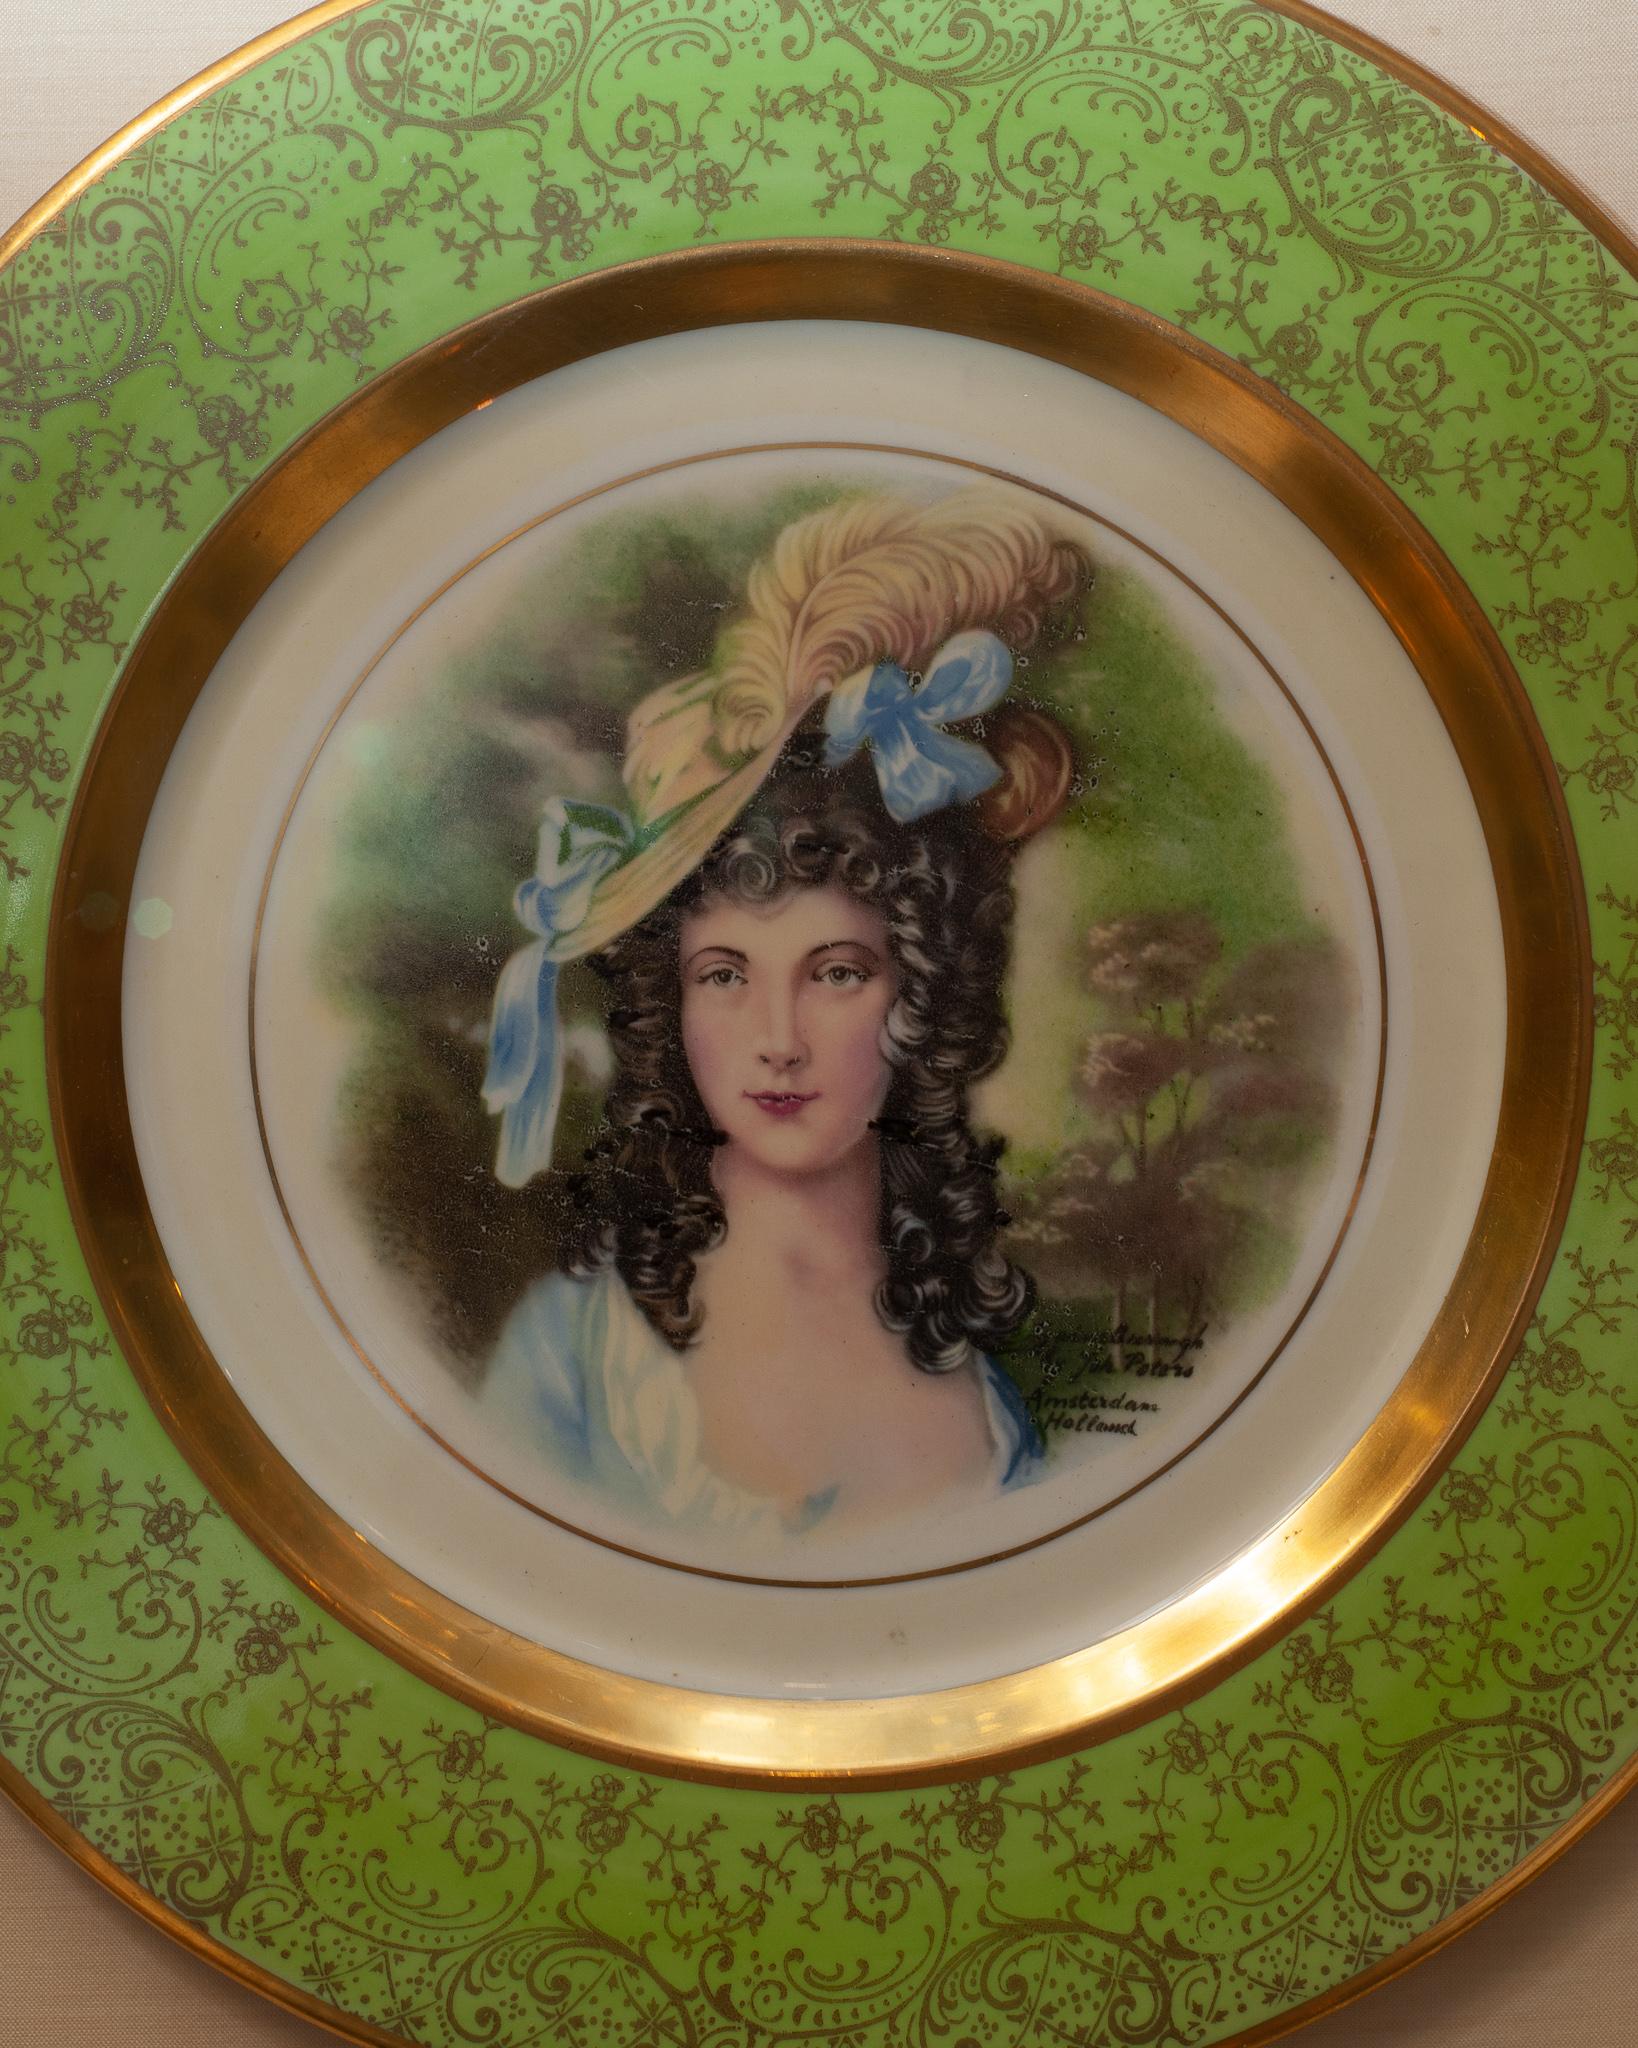 A stunning antique handprinted Osborne China 24K gold plate, mounted in a custom framed shadowbox lined with silk.